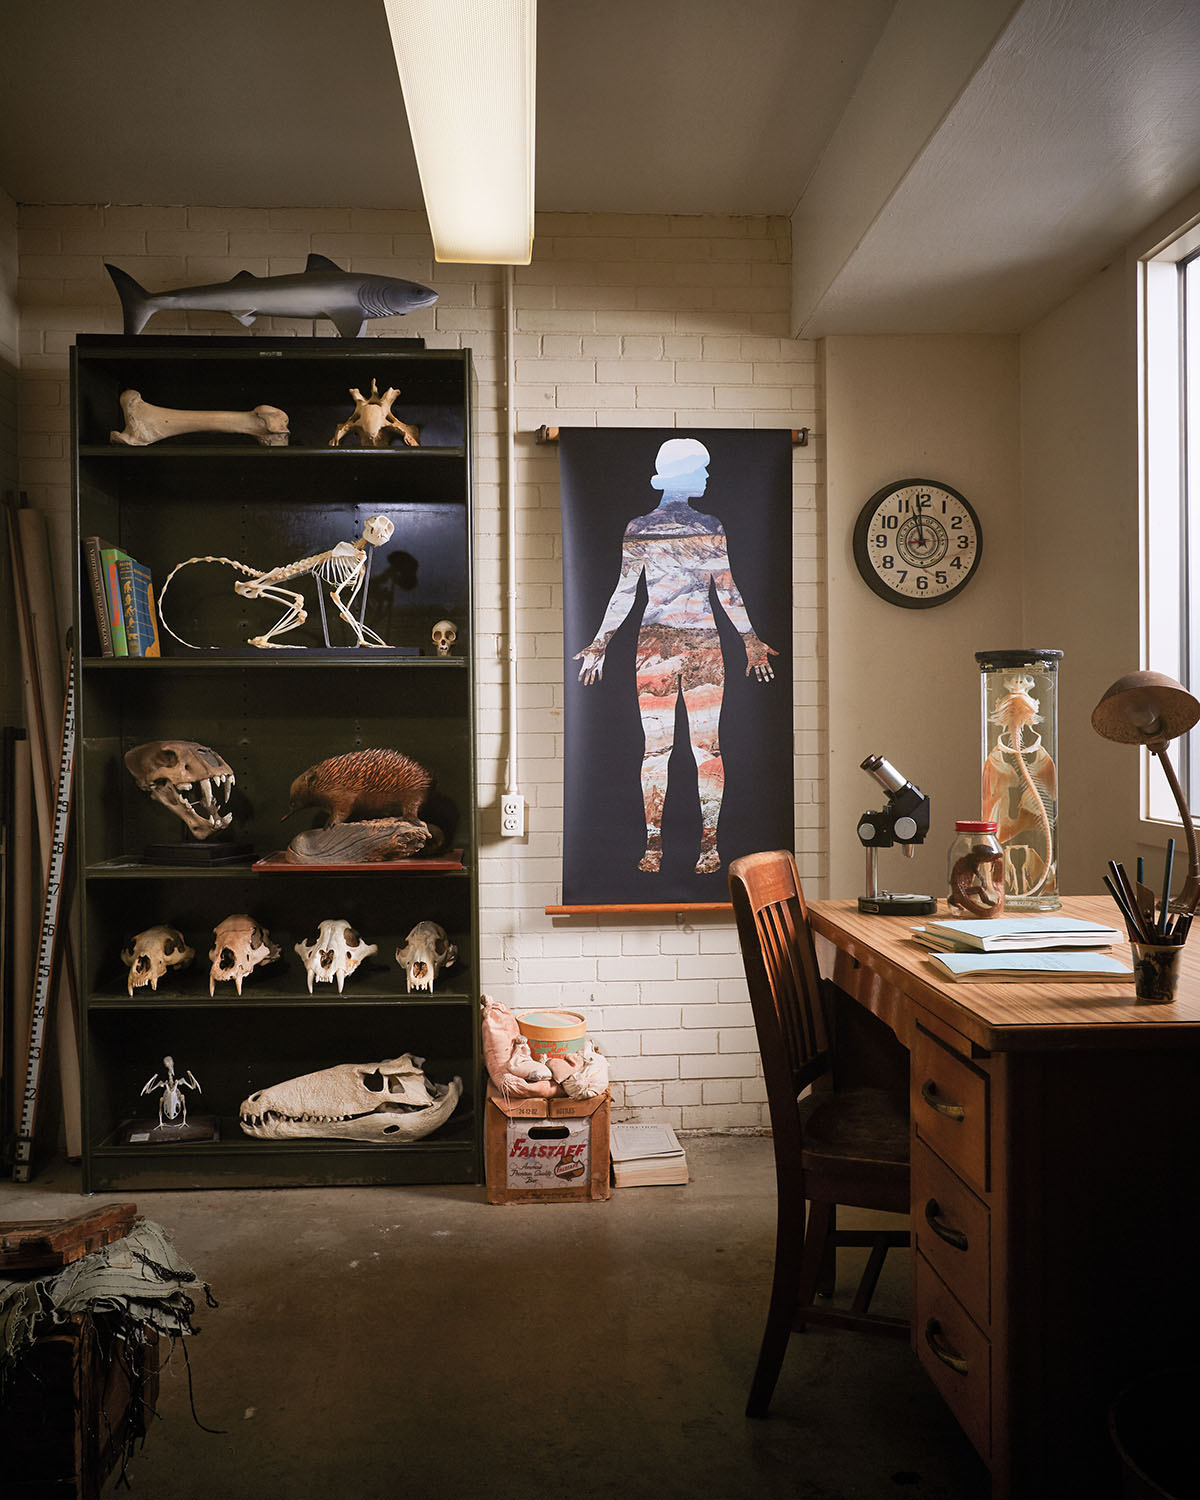 The inside of an office with numerous fossils and artifacts on a bookshelf next to a poster of a human-like figure